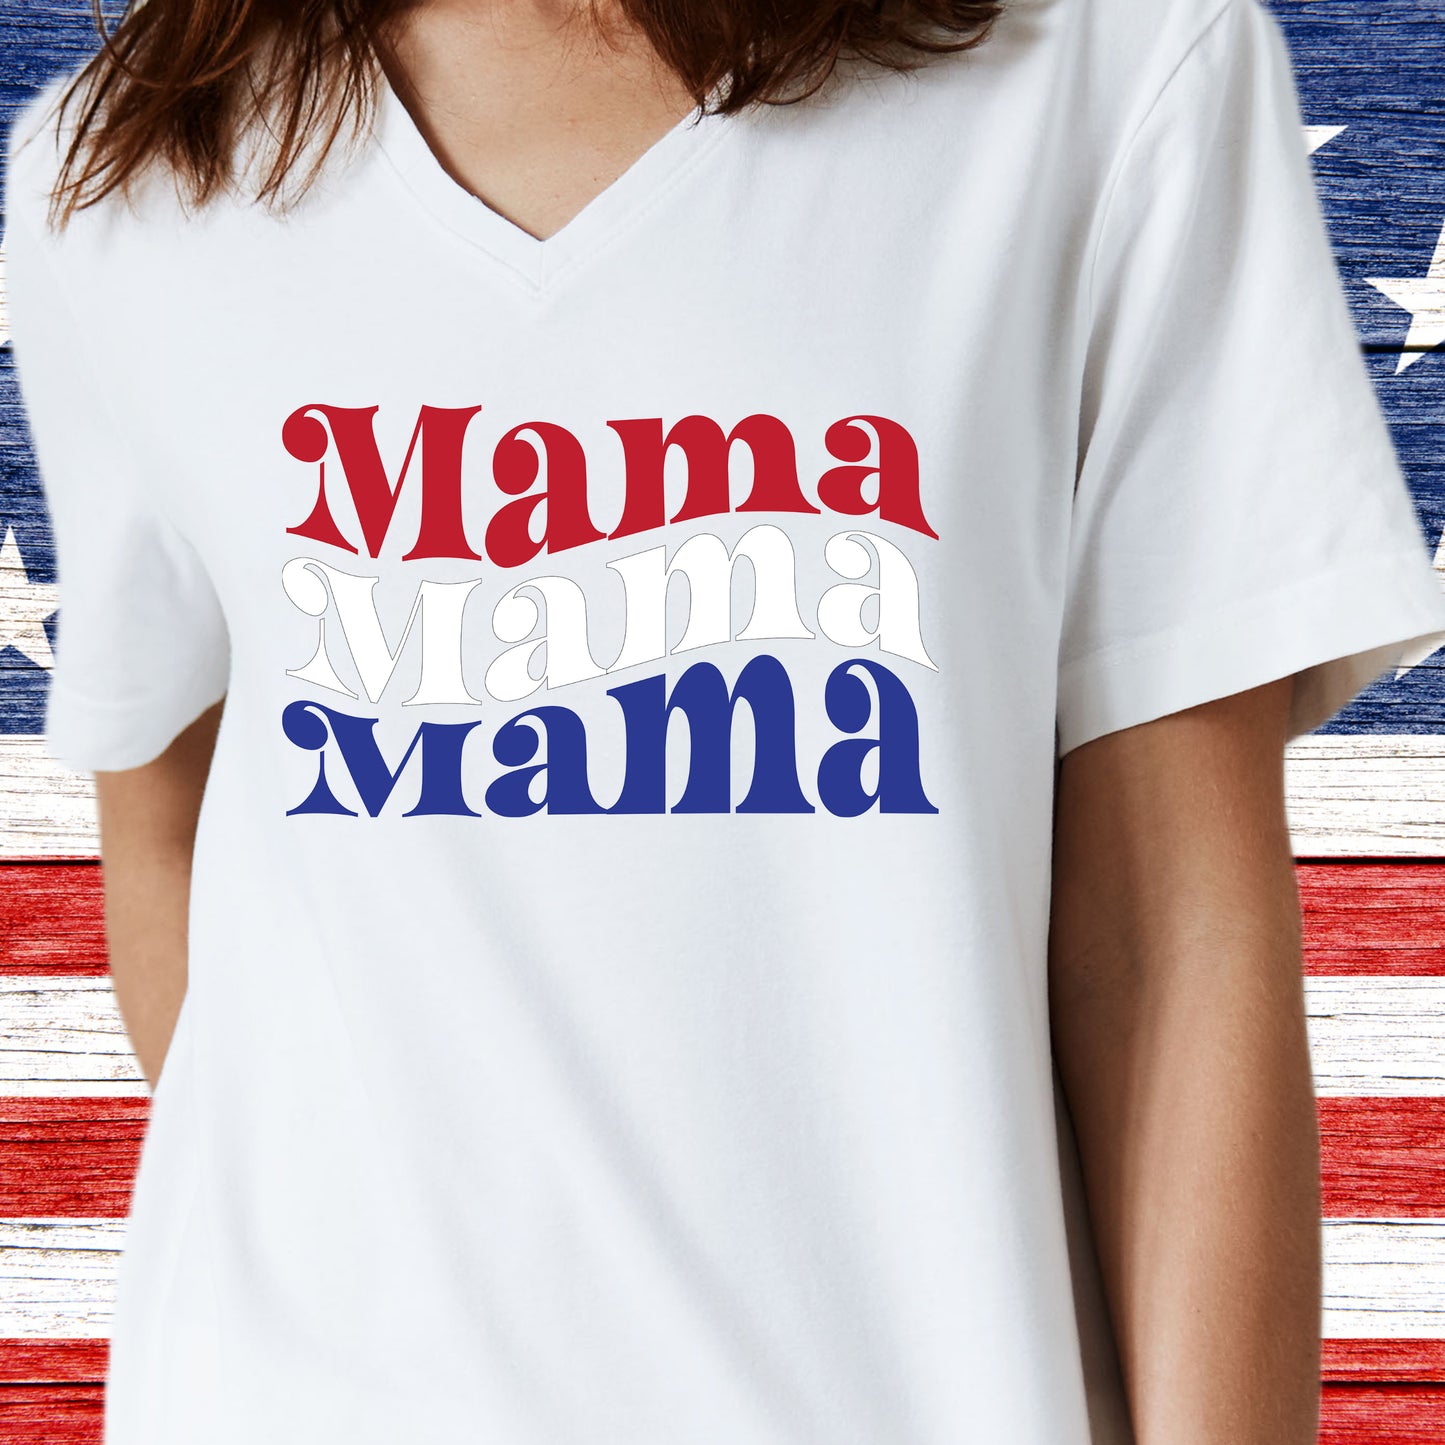 Mama T-Shirt For Mother's Day Gift For Mom TShirt For Conservative T Shirt For Patriotic Mom Shirt For America First Shirt